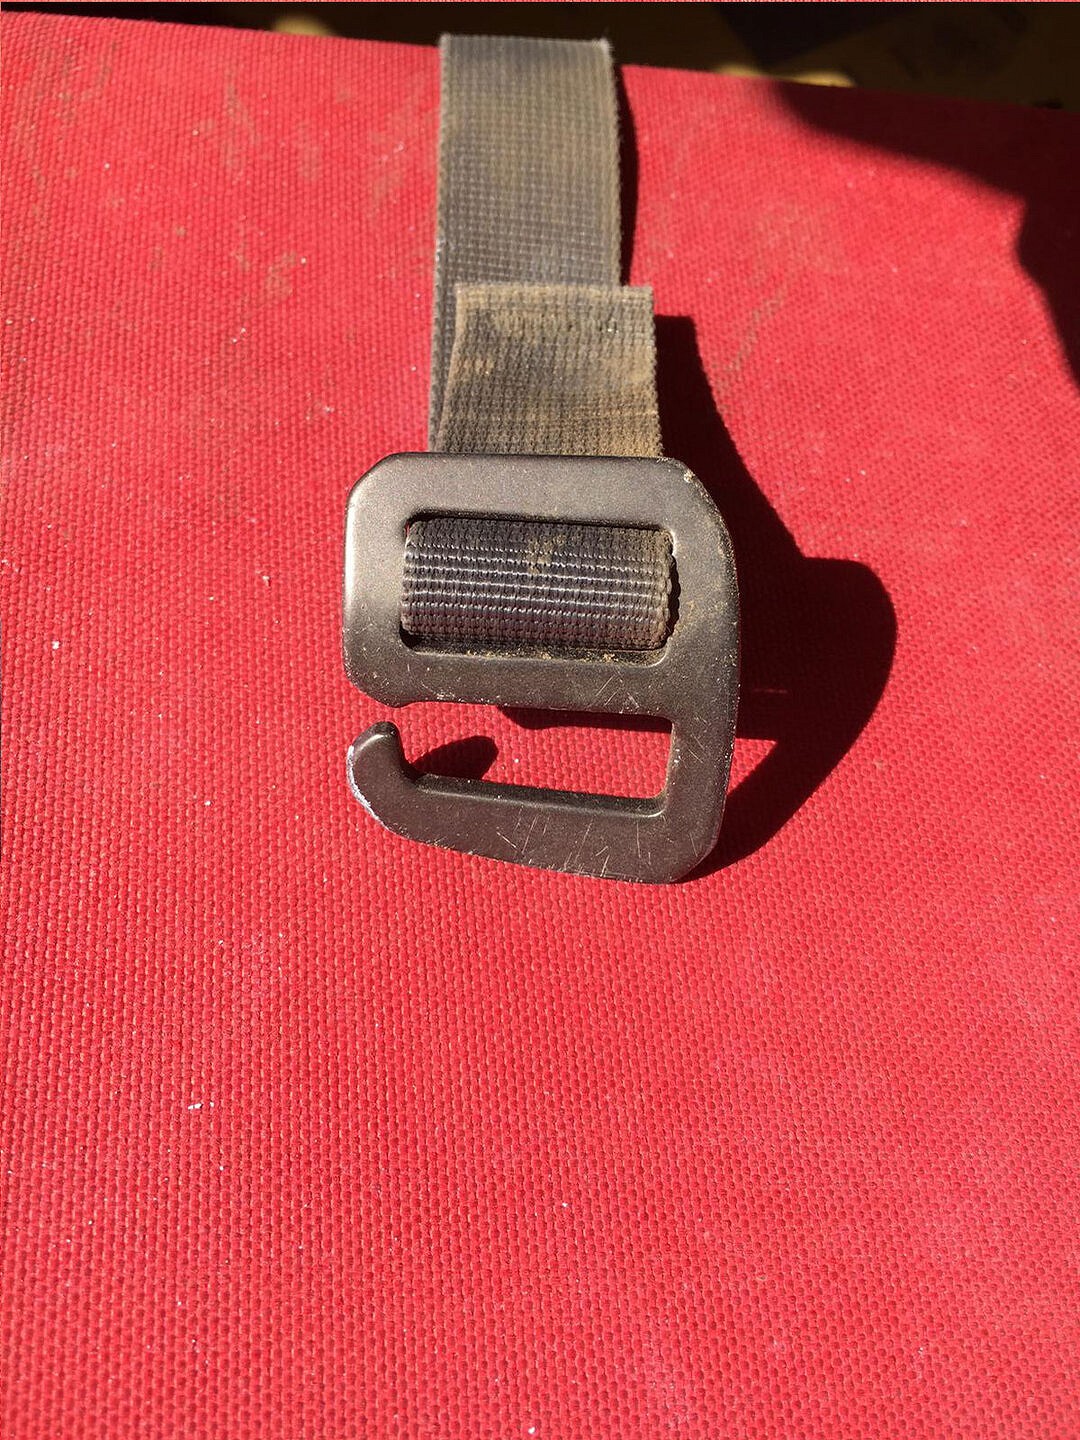 The Buckles have a habit of undoing when they're not under tension  © UKC Gear